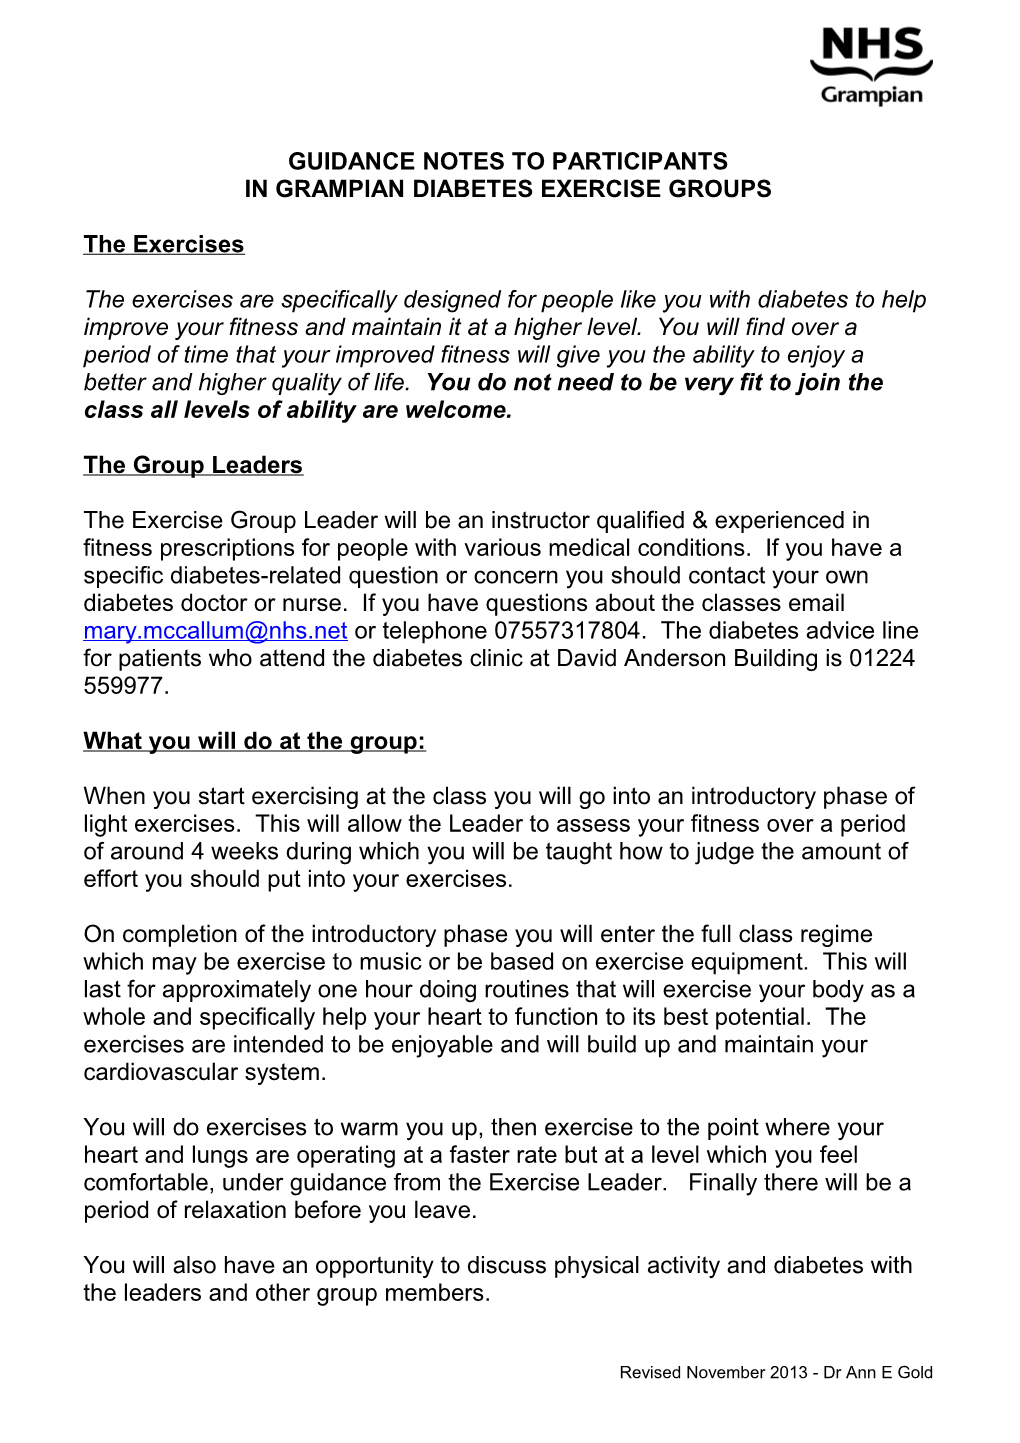 Guidance Notes to Participants in Diabetes Fitness Classes